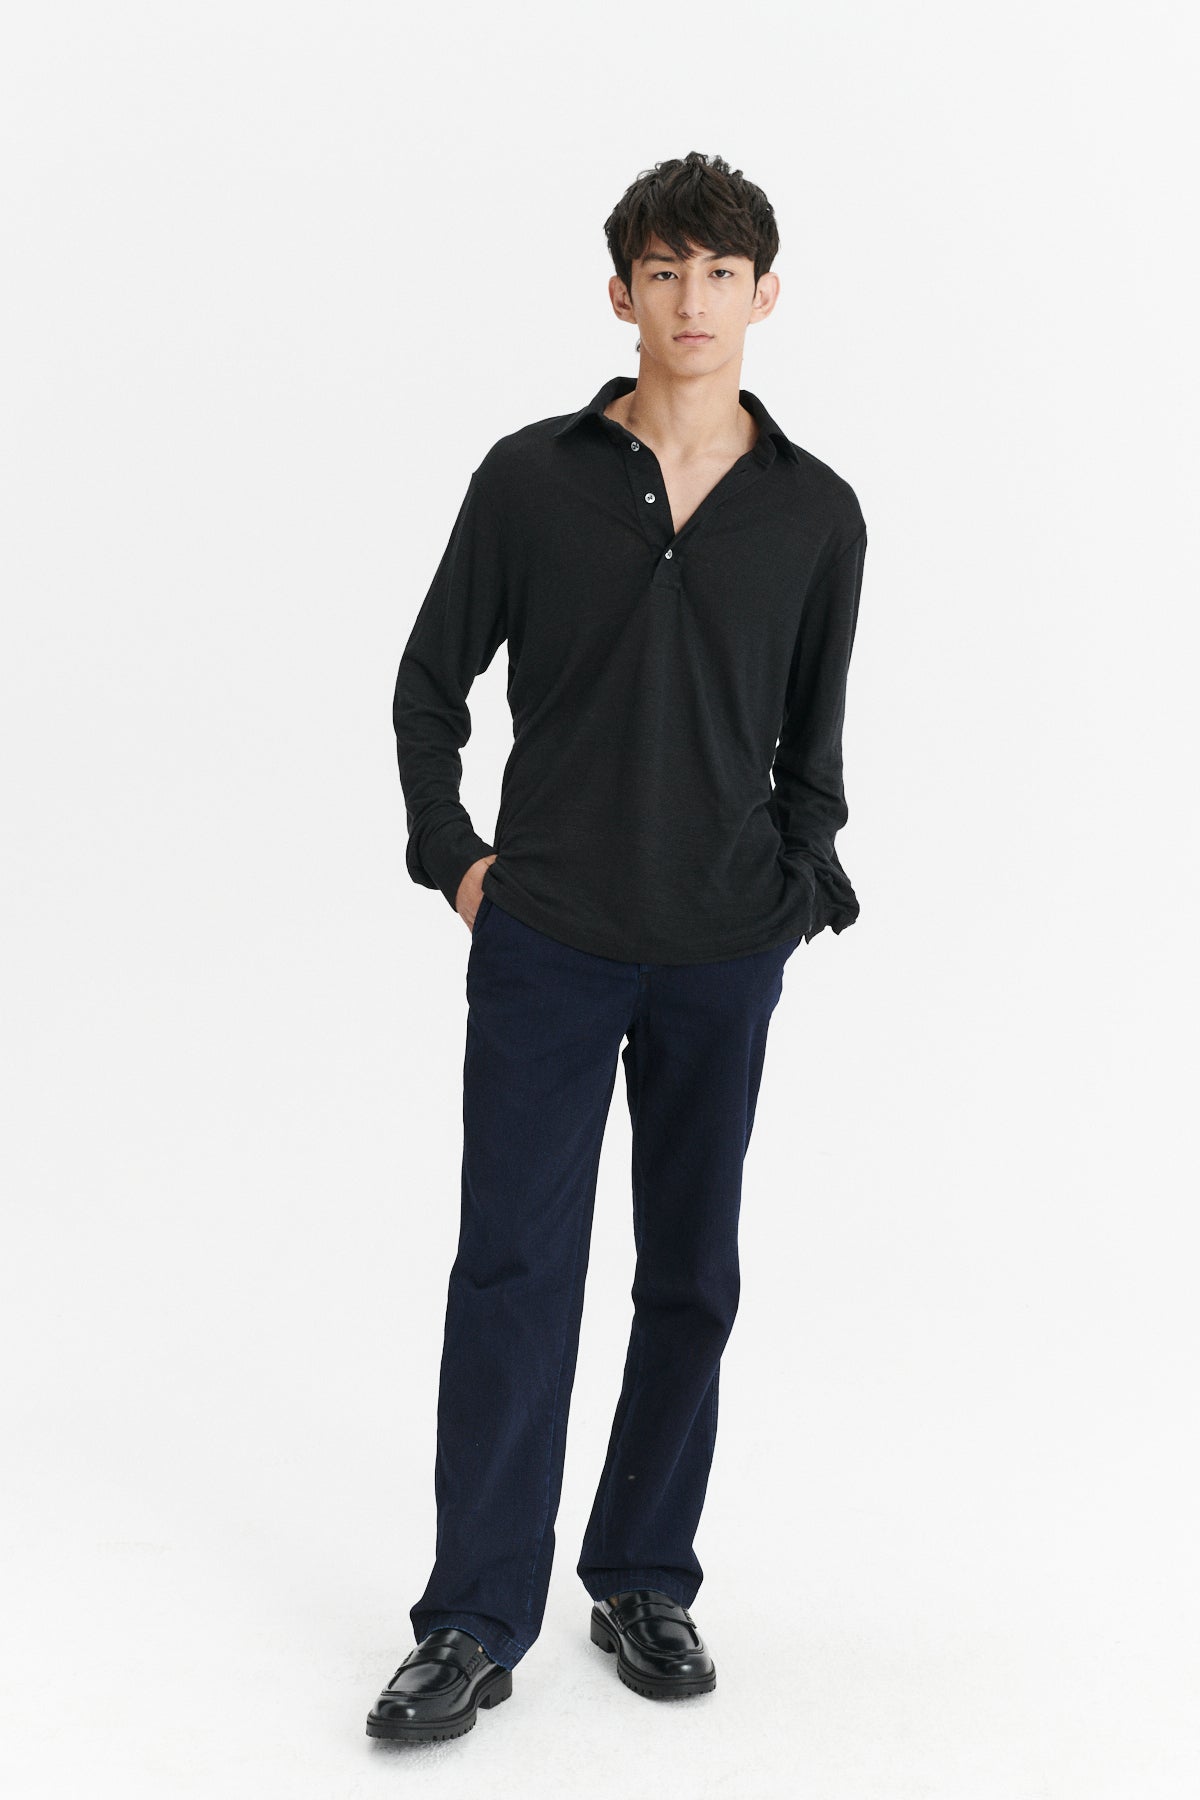 Long Sleeve Polo Shirt in the Finest Black Lithuanian Linen Jersey